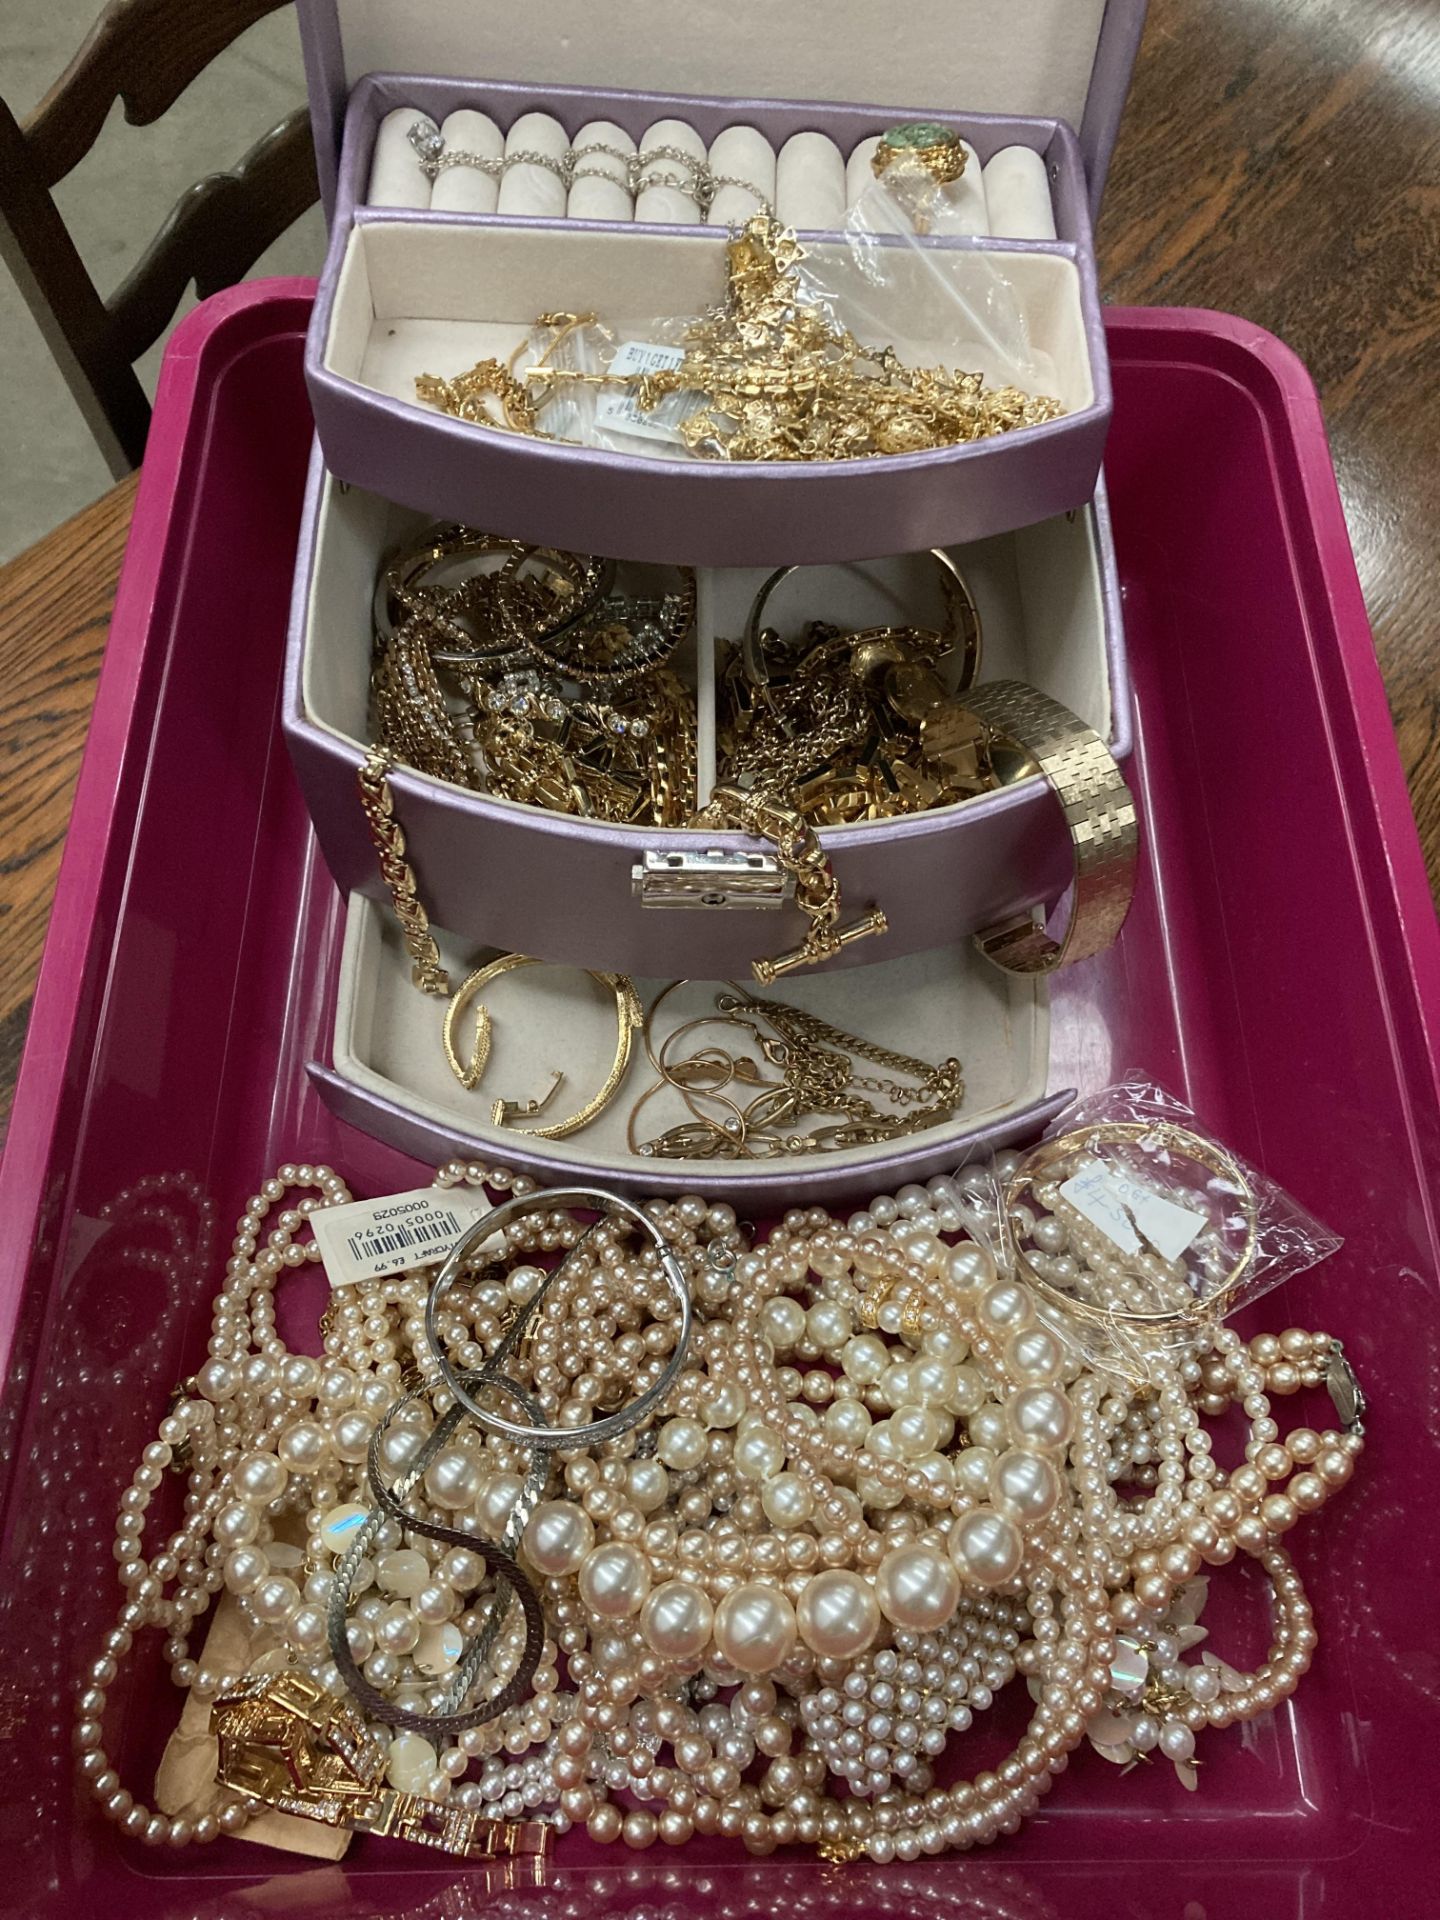 Contents to plastic tray - a quantity of costume jewellery including a purple jewellery box,